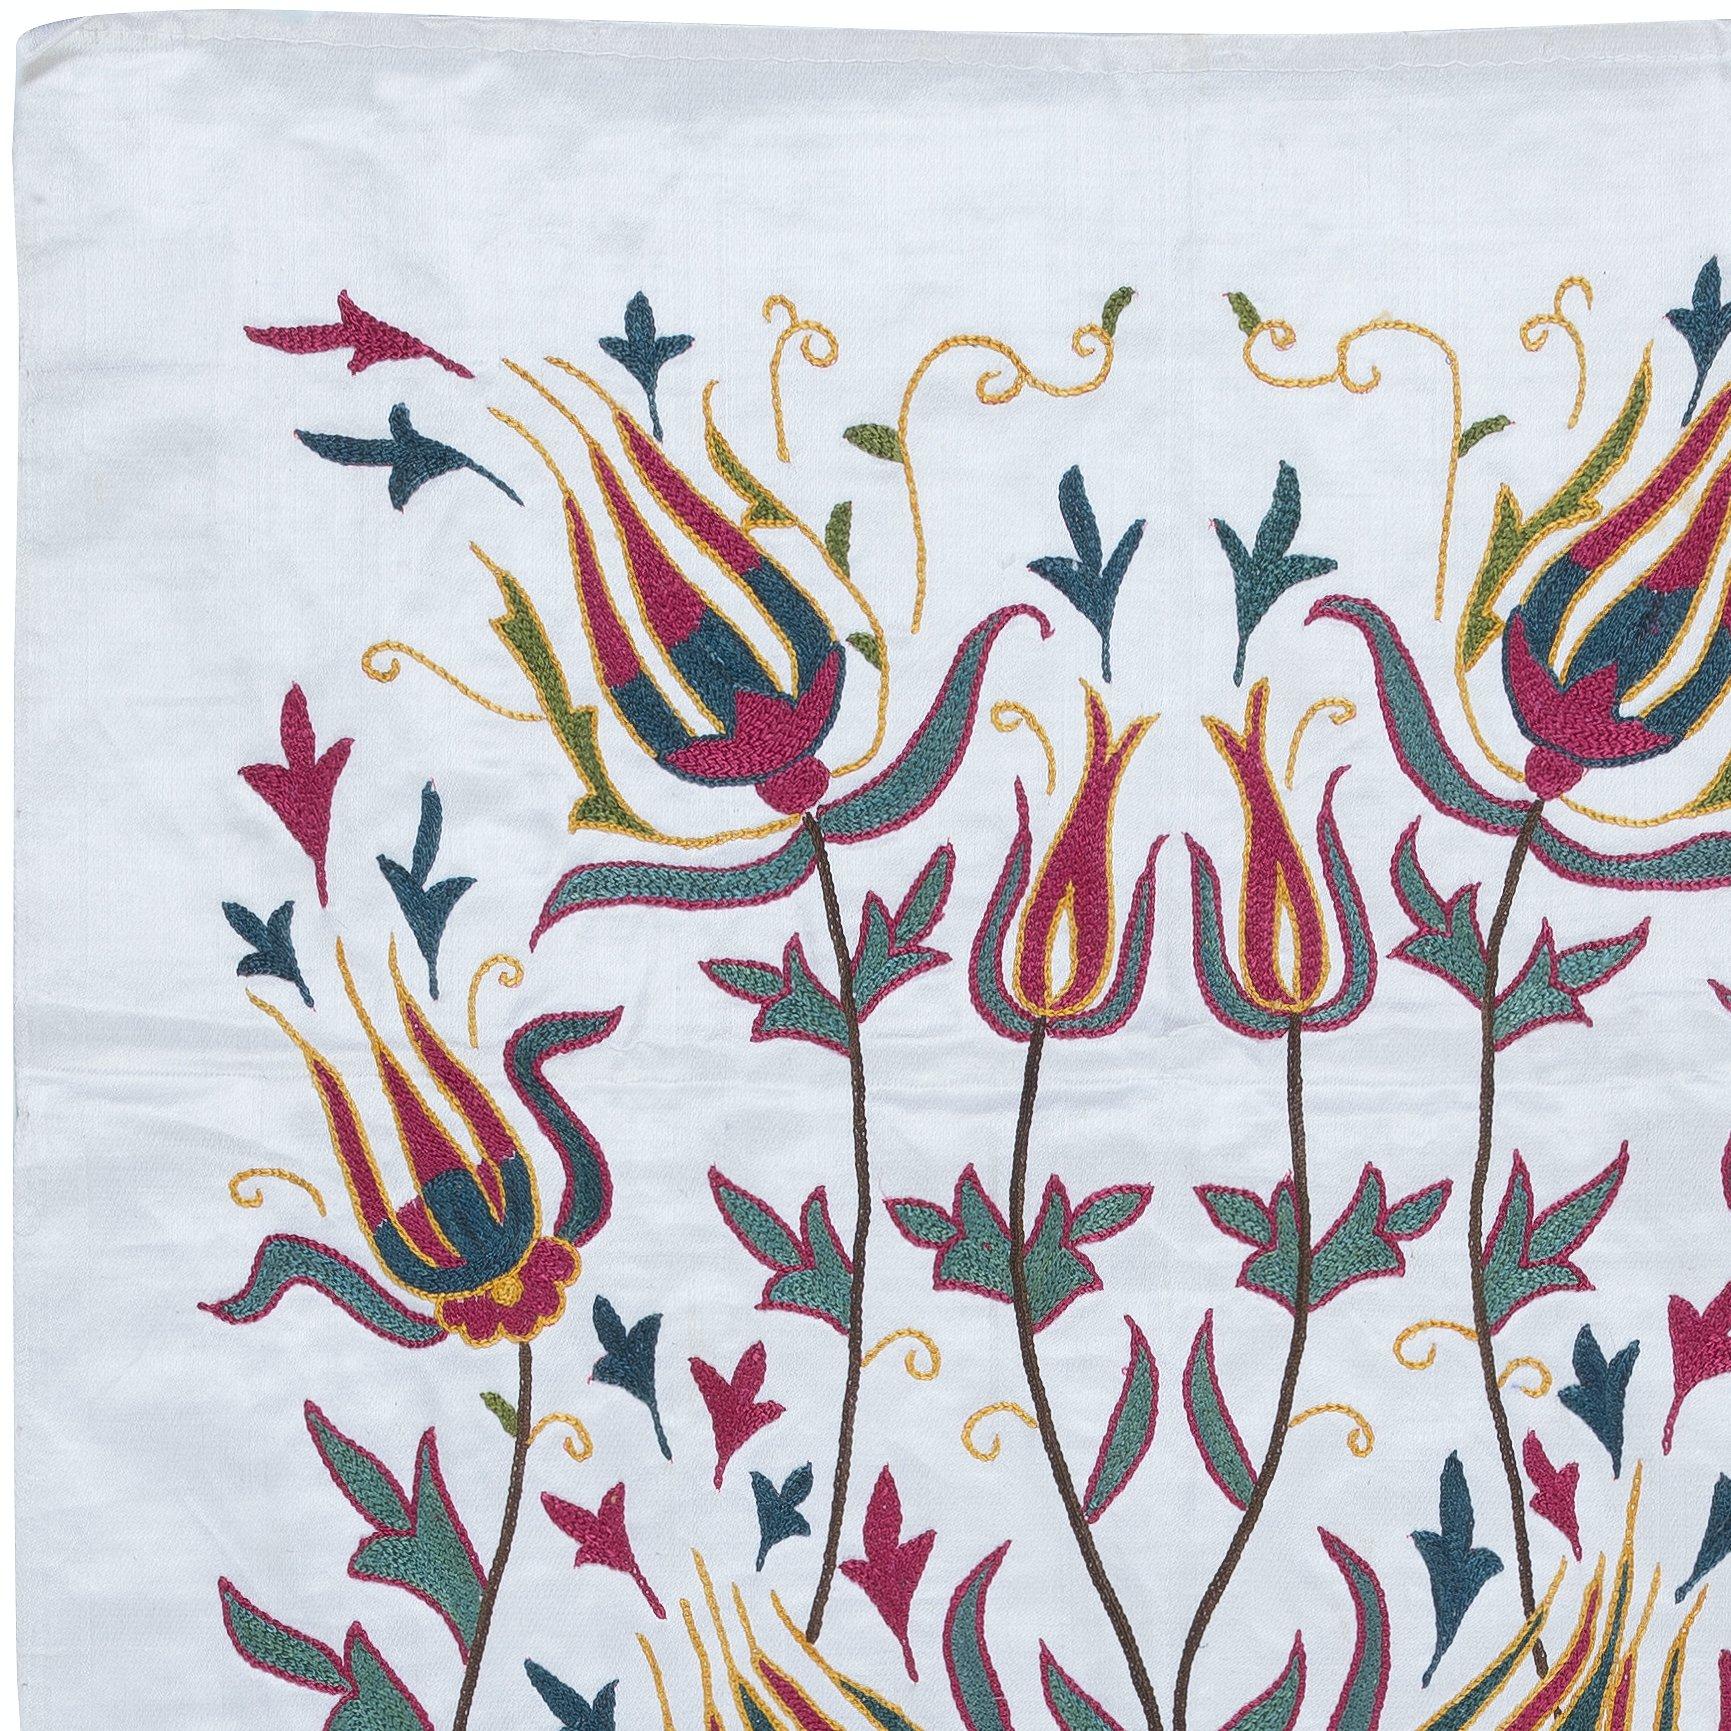 Introducing our exquisite Suzani Hand Embroidered 100% Silk Wall Hanging, a captivating piece that seamlessly blends artistry and functionality. This stunning decor item doubles as both a tapestry and a throw, making it perfect for adding an elegant